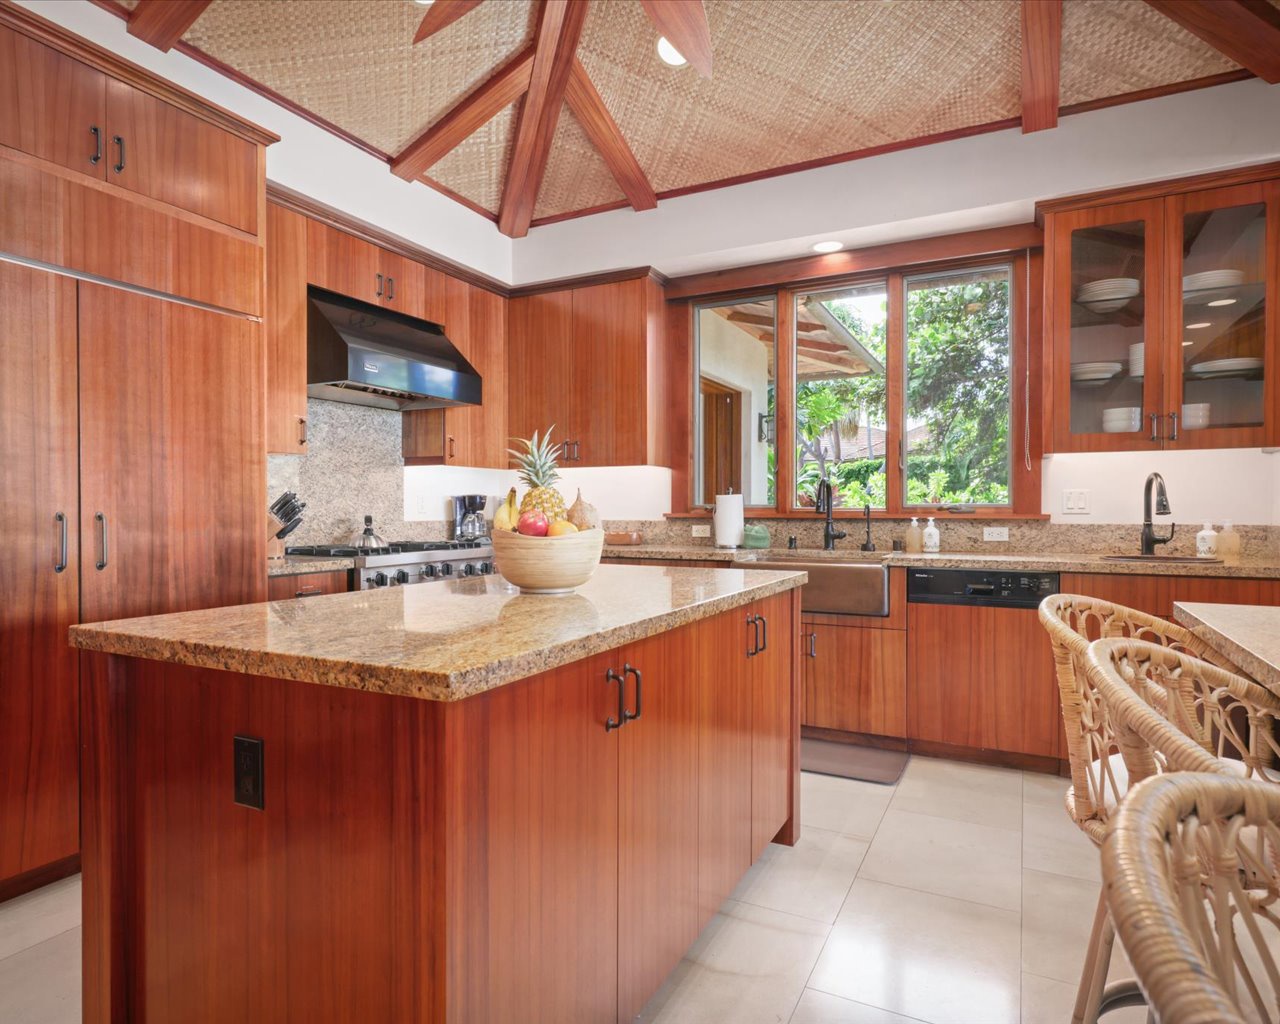 Kailua Kona Vacation Rentals, 3BD Pakui Street (131) Estate Home at Four Seasons Resort at Hualalai - The kitchen comprises of ample counter prep & cabinet space with a circular & open flow